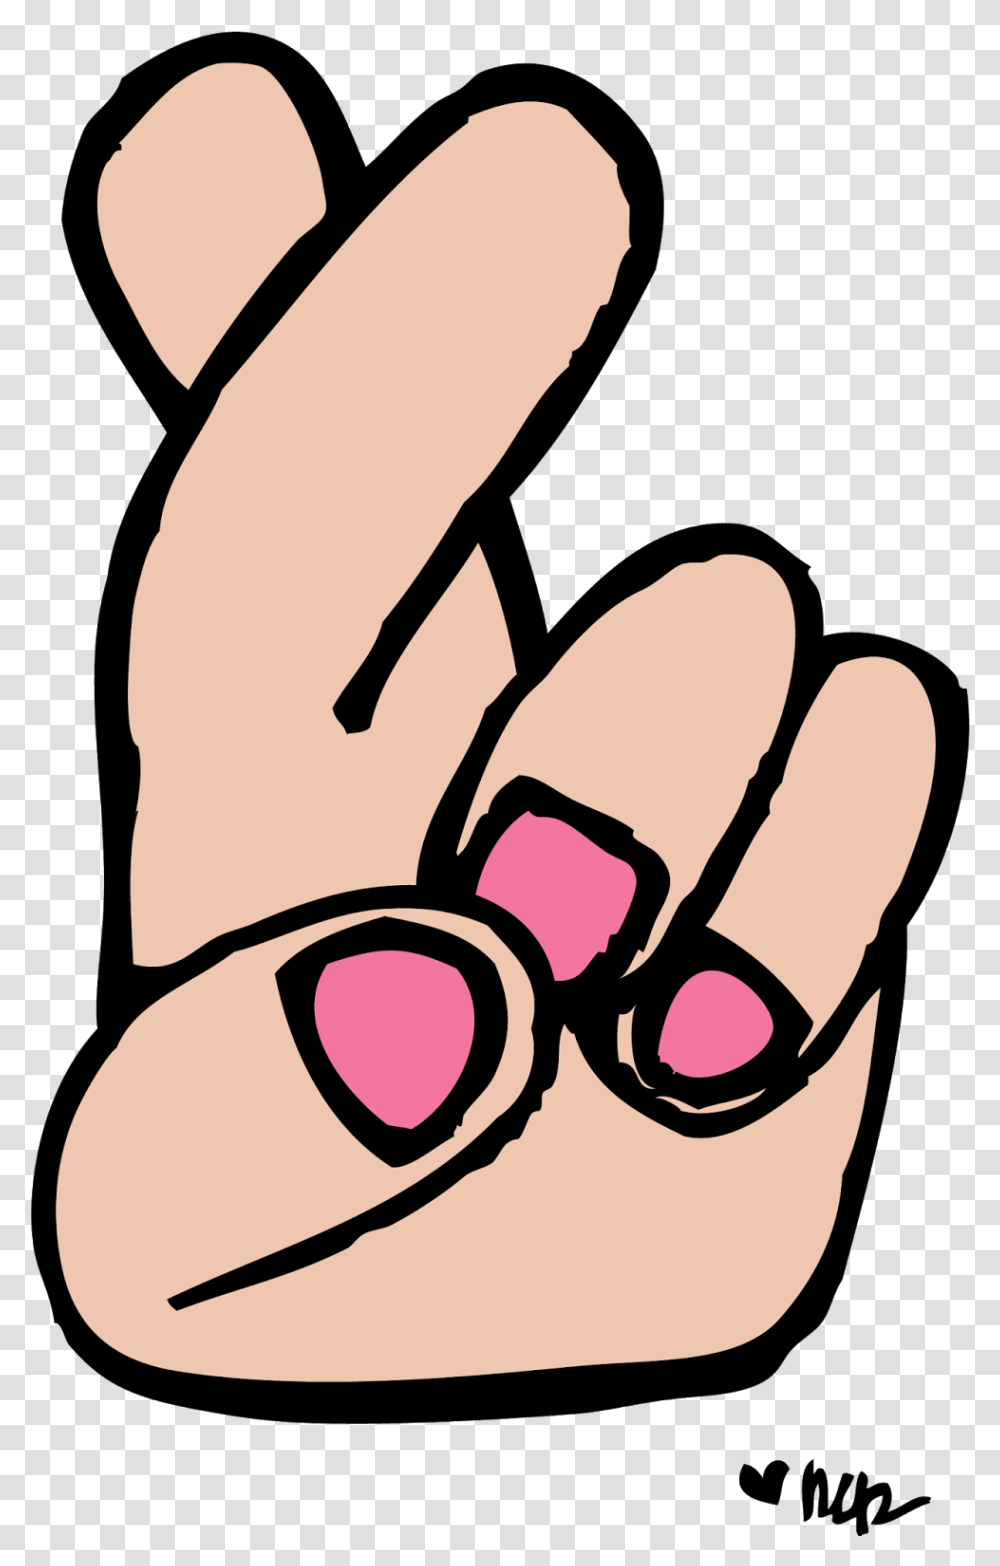 Fingers Crossed Clip Art Clip Art Fingers Crossed, Hand, Nail, Manicure Transparent Png